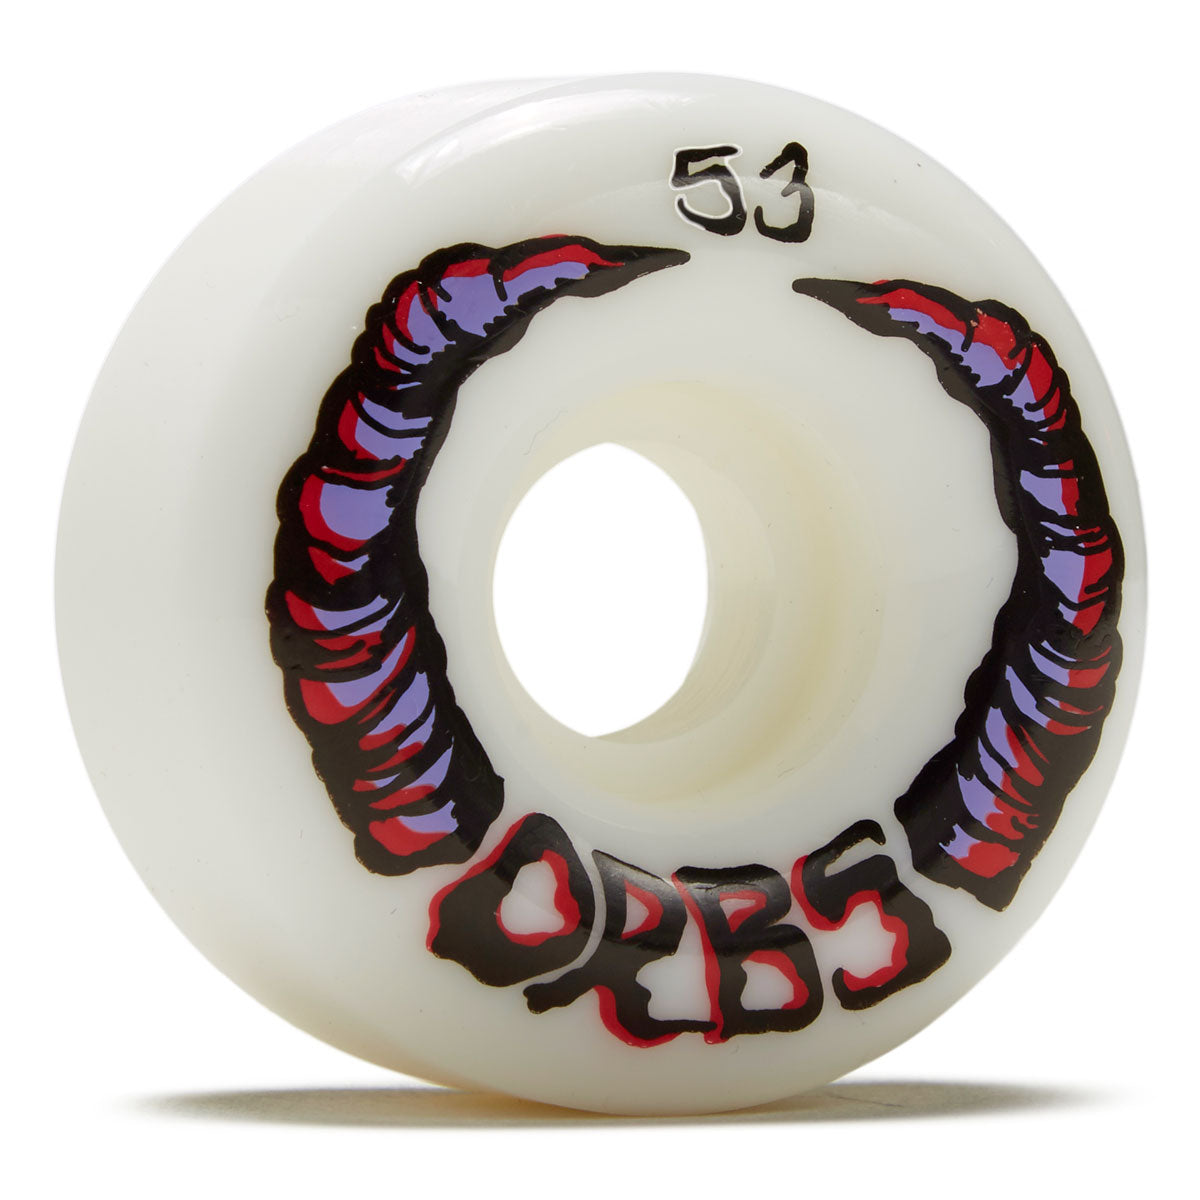 Welcome Orbs Apparitions Round 99A Skateboard Wheels - White - 53mm image 1